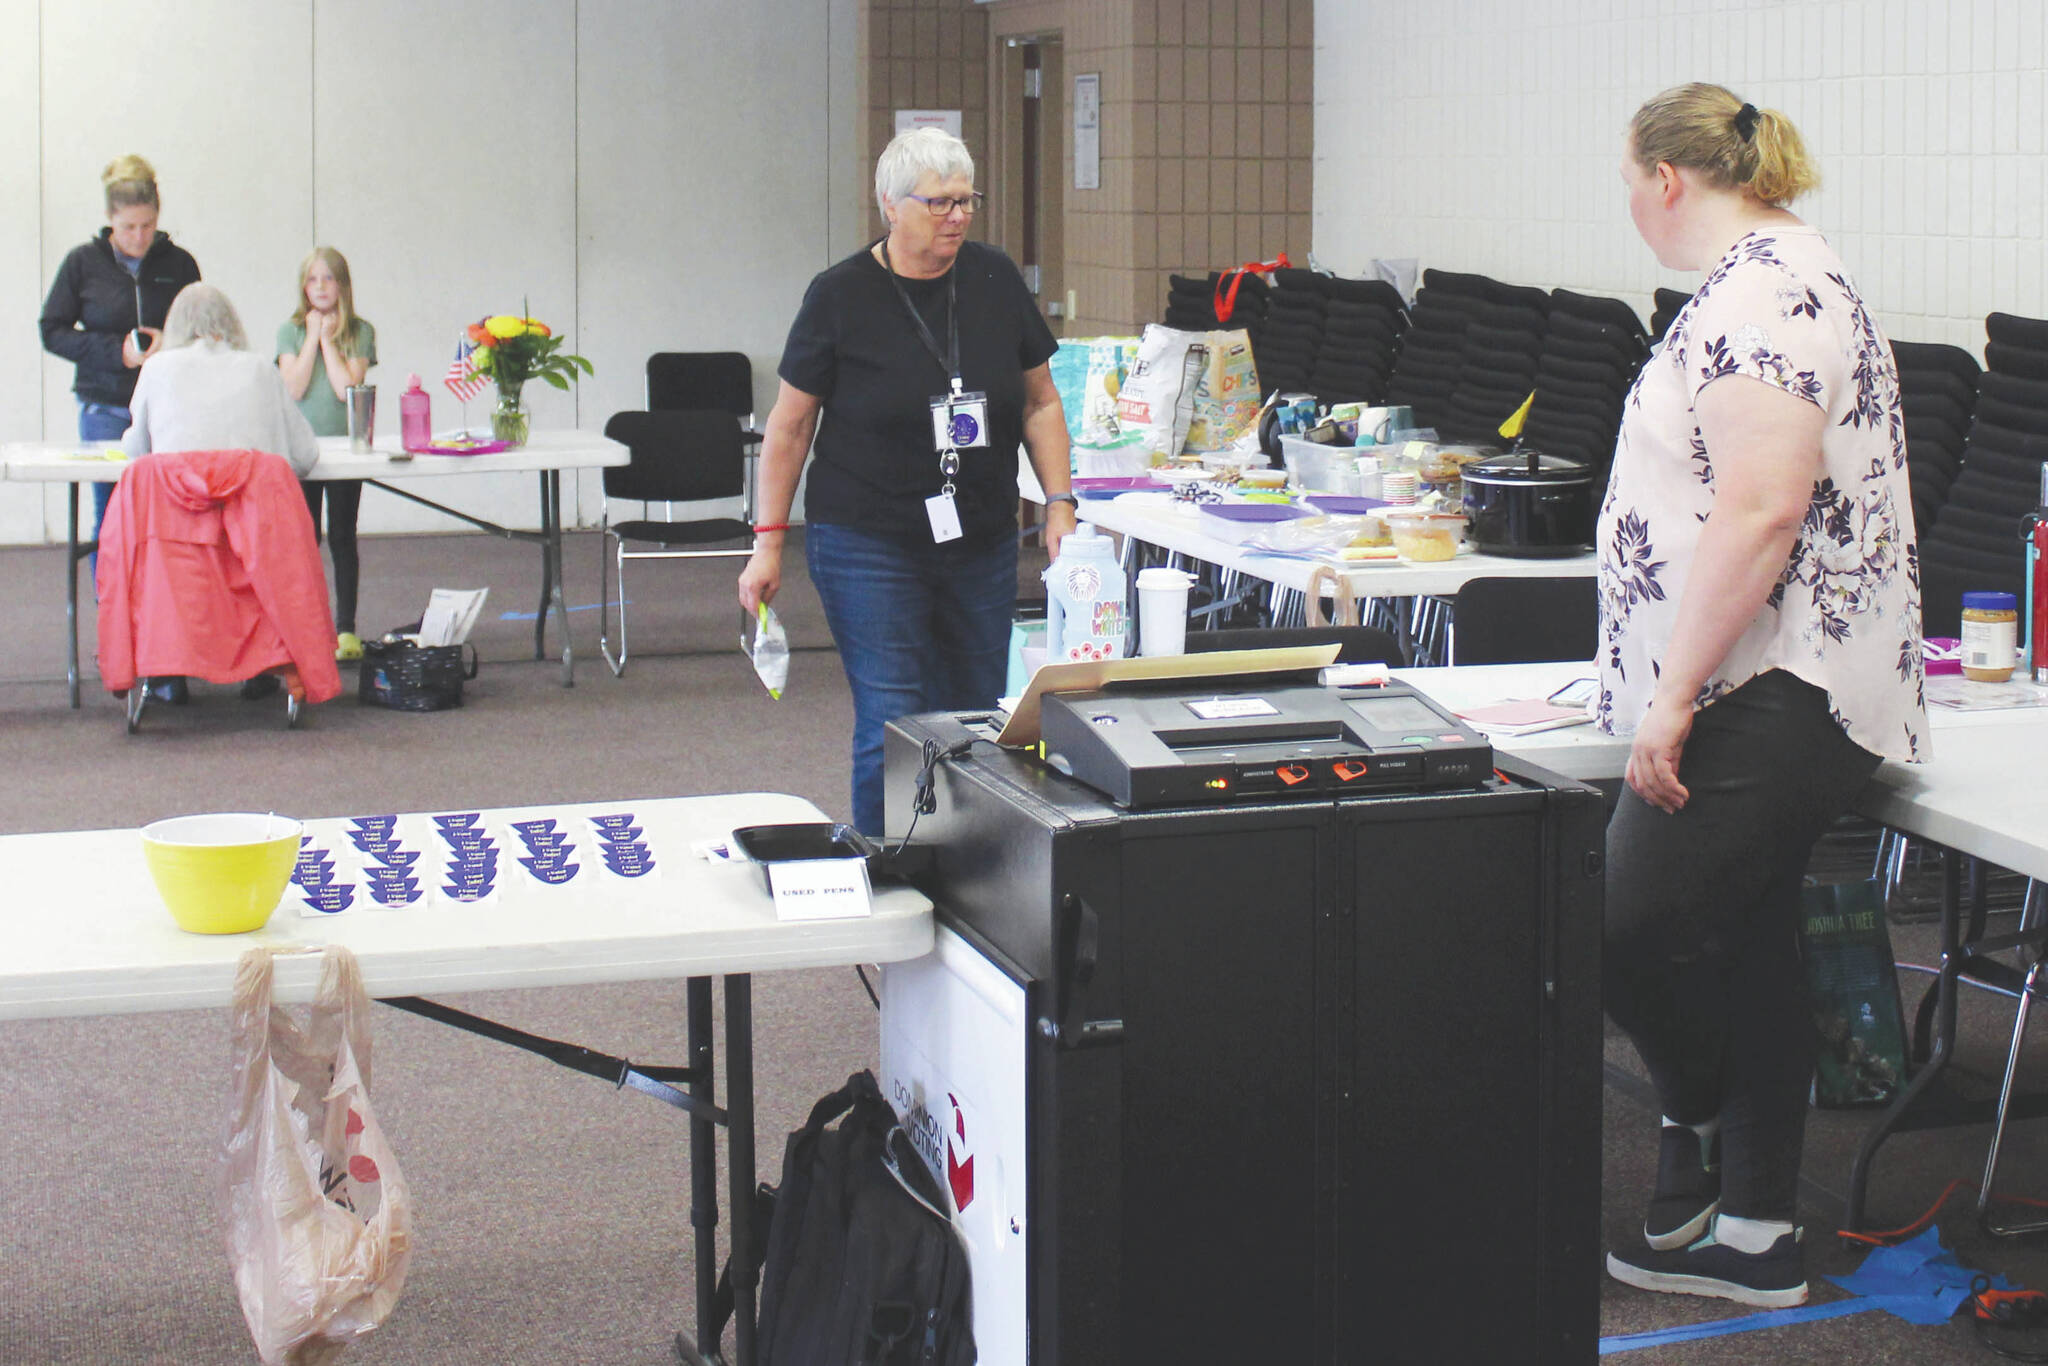 Pollworkers Carol Louthan, center, and Harmony Bolden work at the Soldotna Regional Sports Complex on Tuesday, Aug. 16, 2022, in Soldotna, Alaska. (Ashlyn O’Hara/Peninsula Clarion)